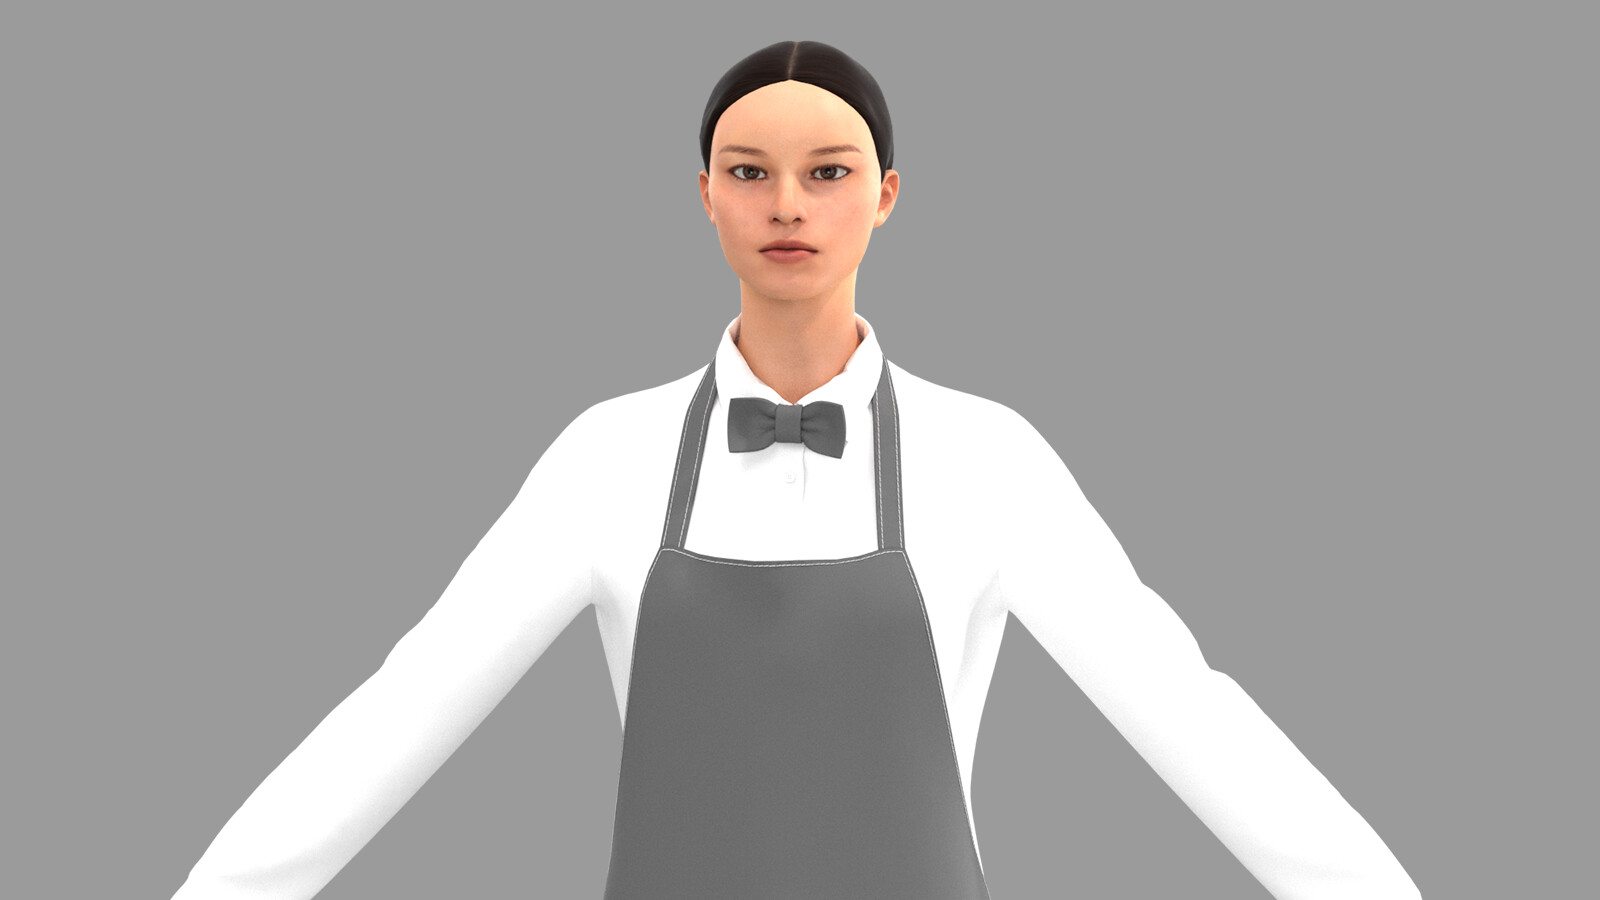 Waiter Outfit Female